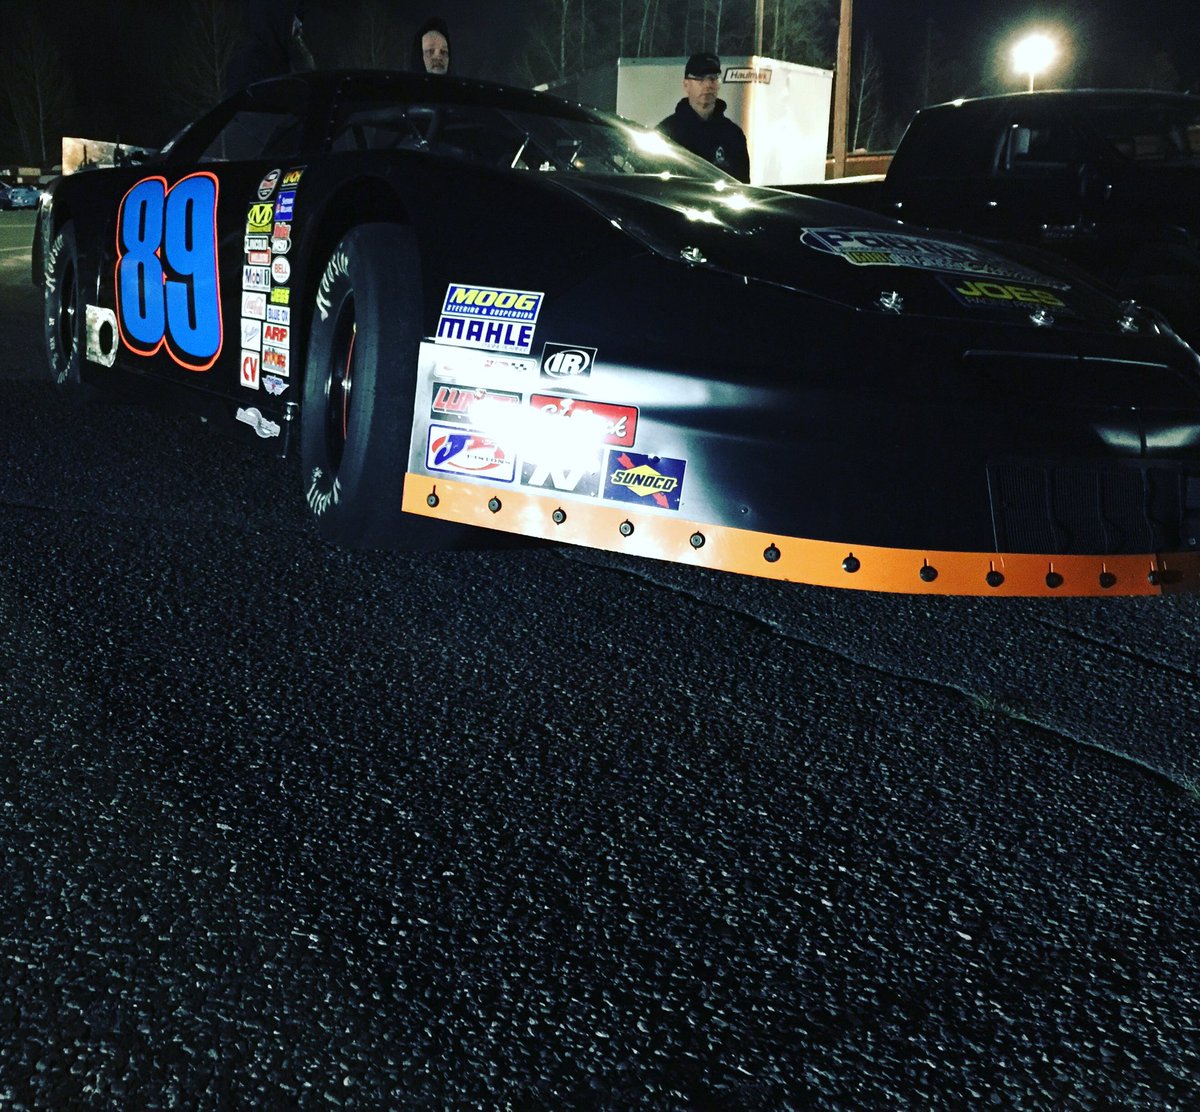 #ShipIt. First race in the Northwest @NASCARHomeTrack @EVGSpeedway #PathfinderChassis